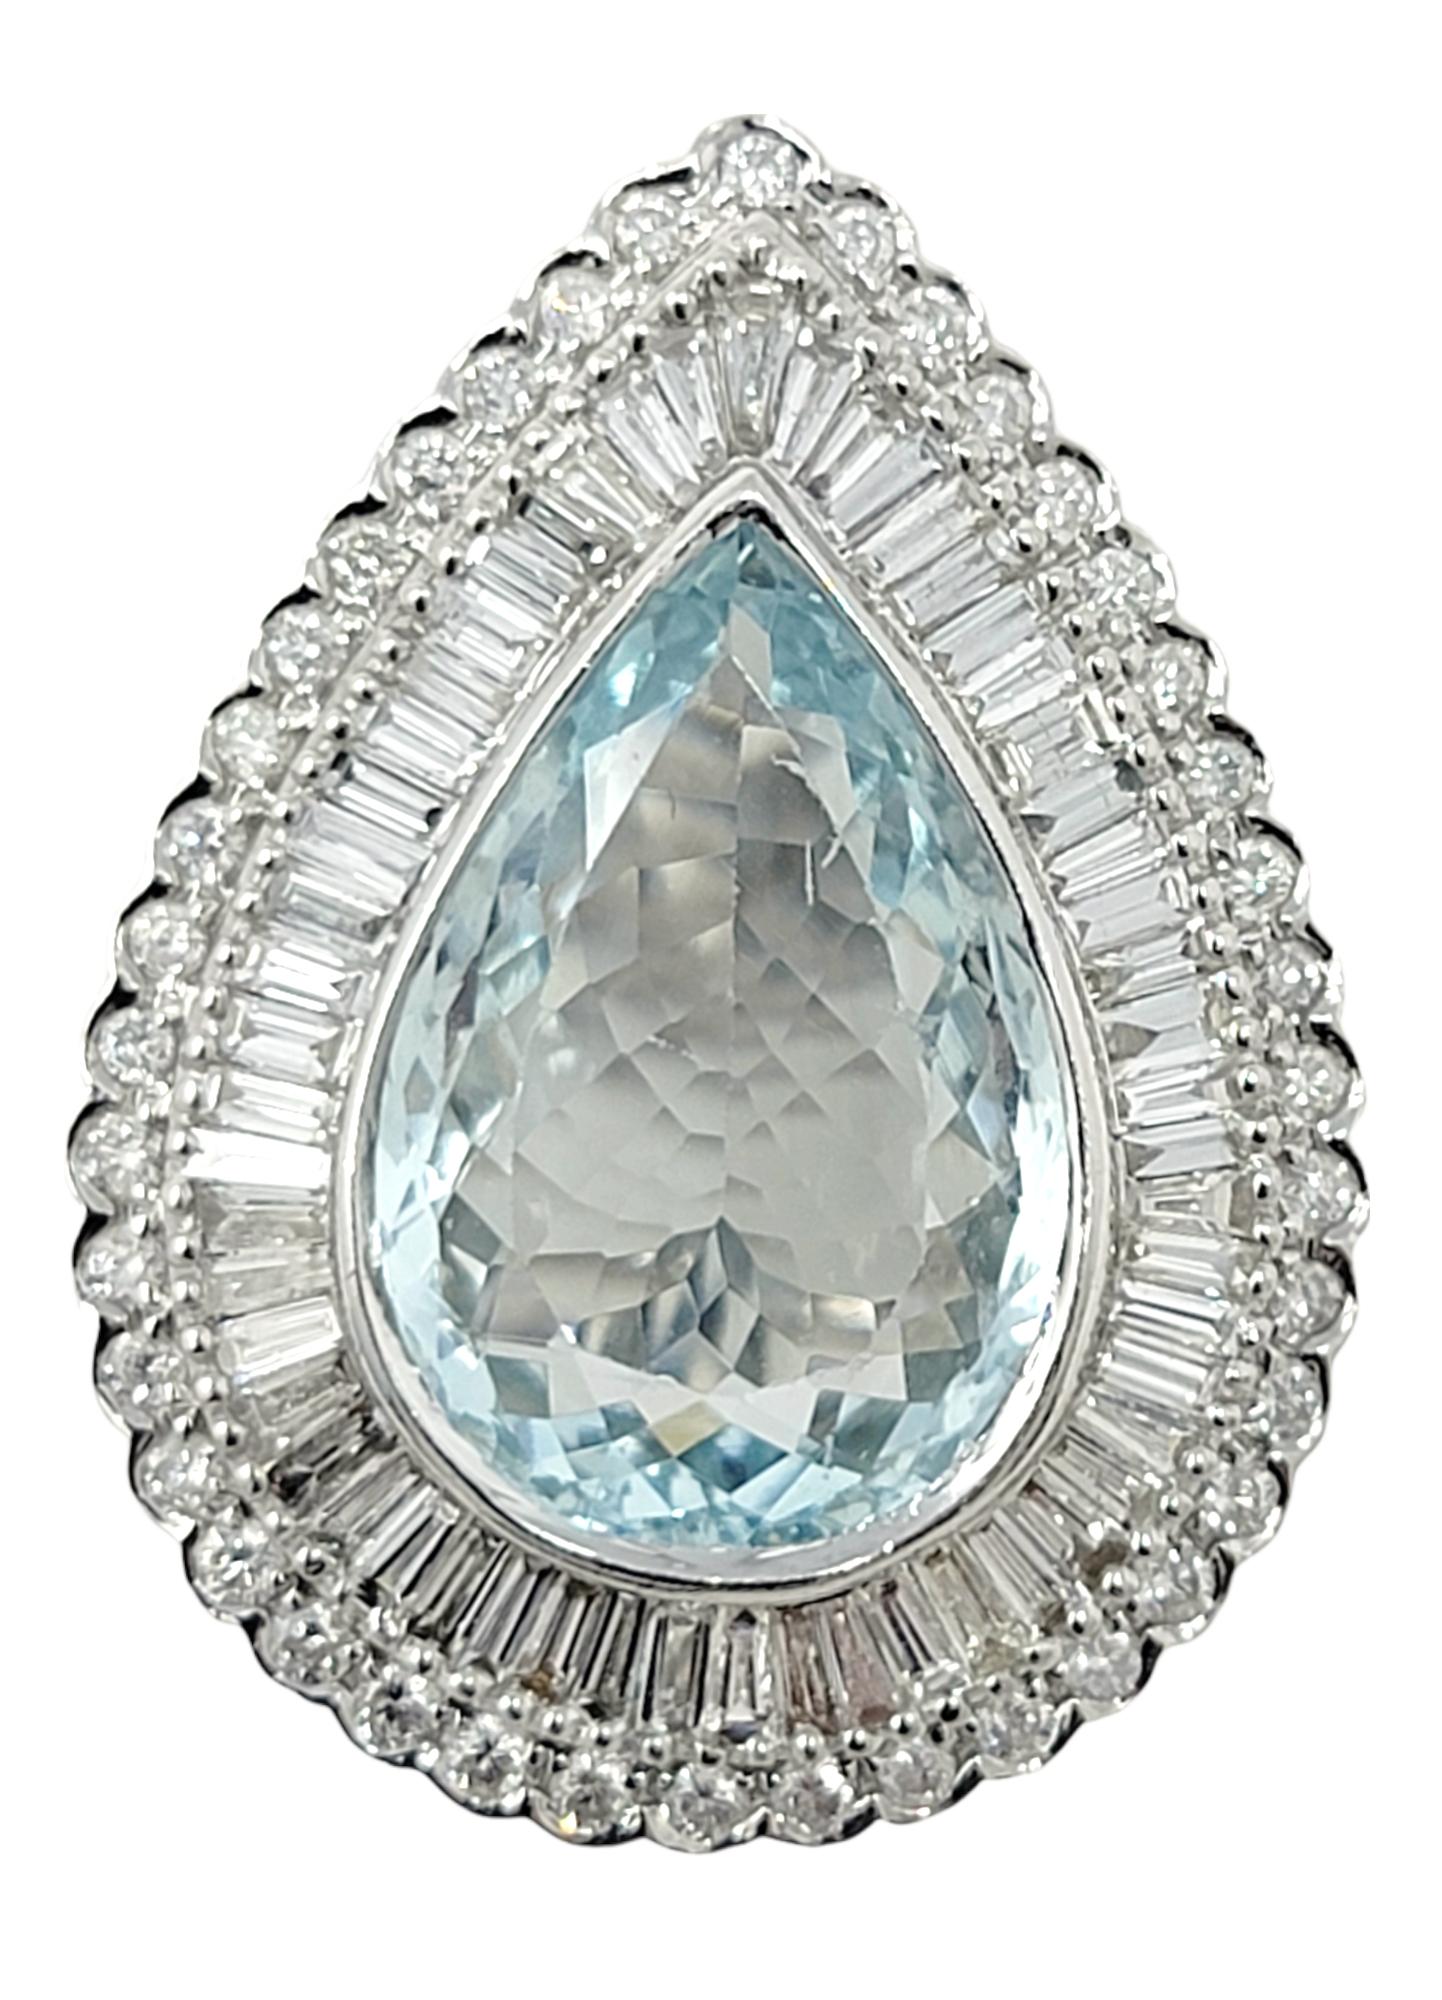 Ring size: 6.5

Simply exquisite aquamarine and diamond cocktail ring. This eye-catching piece makes a bold statement with its impressive size, incredible sparkle and stunning transparent color. The giant pear cut aquamarine stone is bezel set in 18